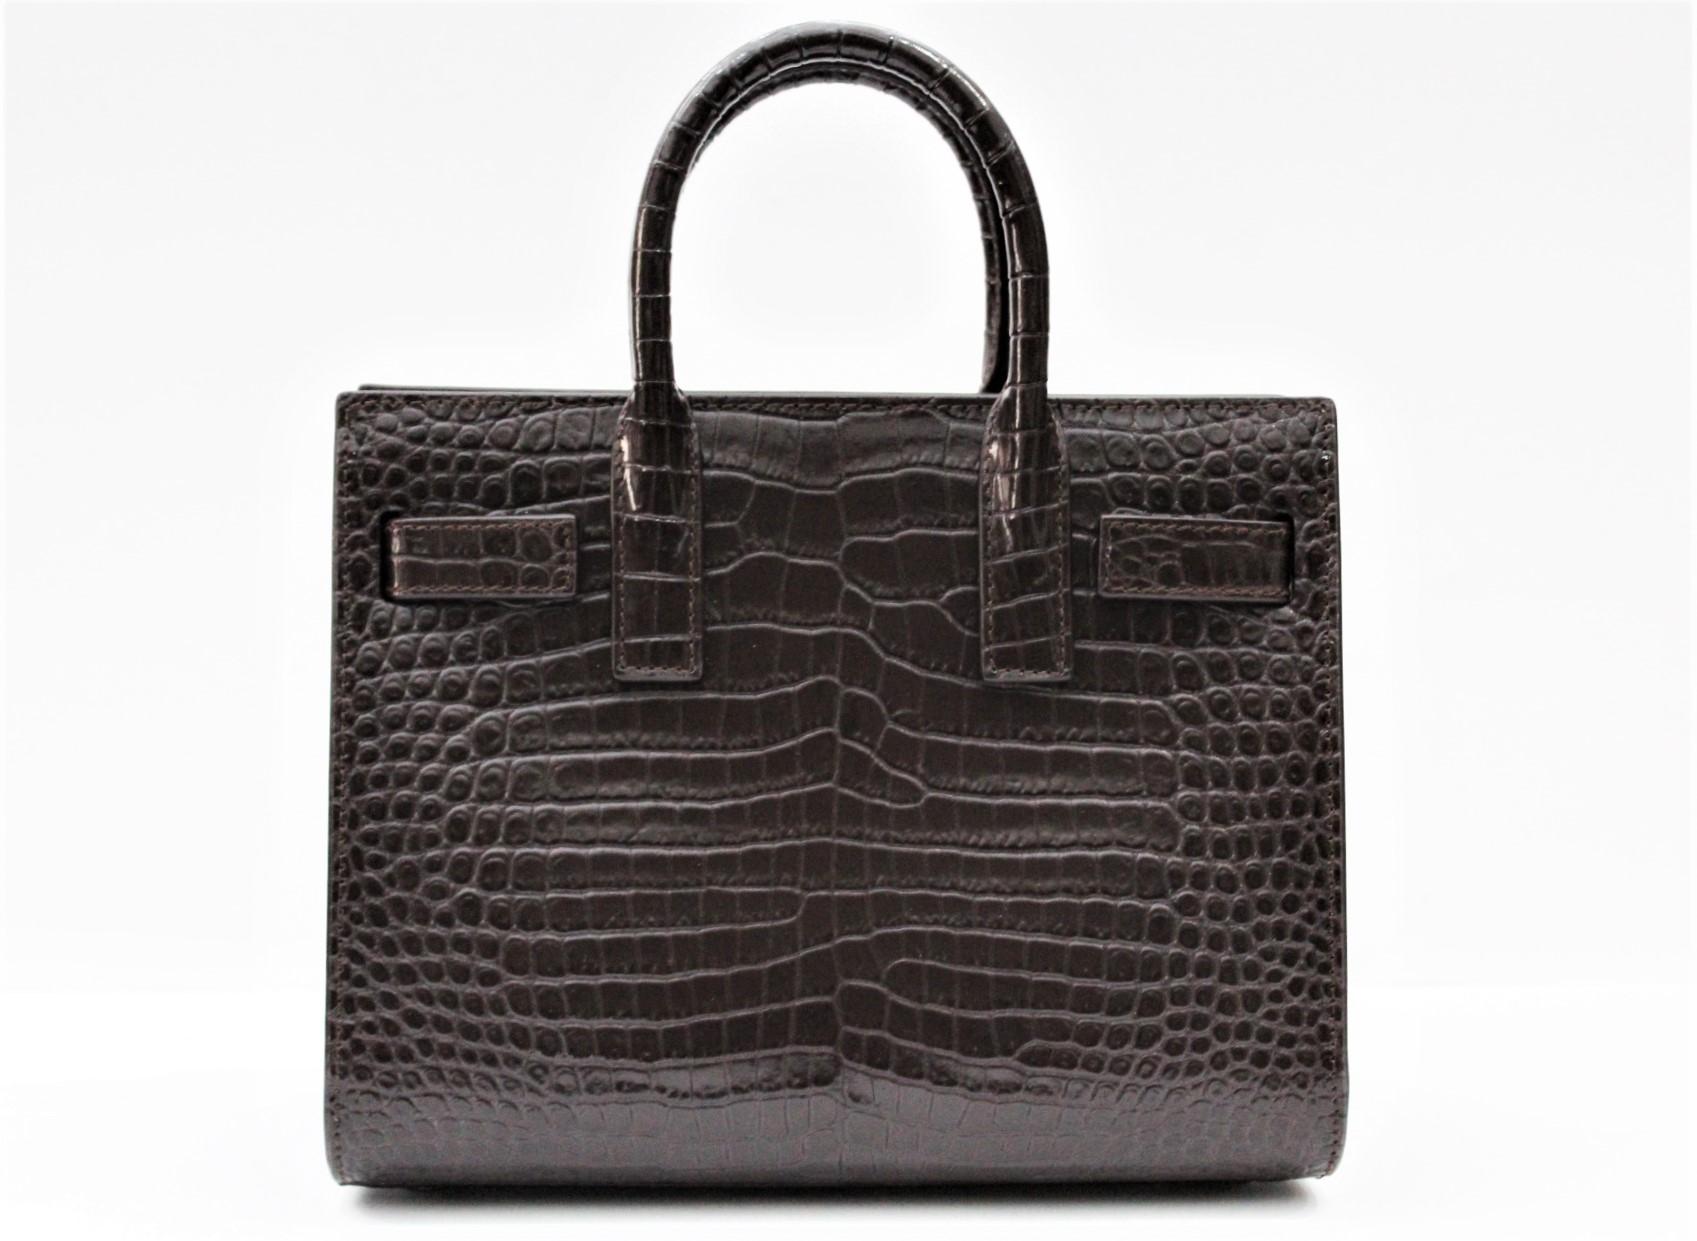 Signature Saint Laurent bag with round sleeves, accordion sizes, compression straps with linguette and adjustable and removable shoulder. Perfect conditions.